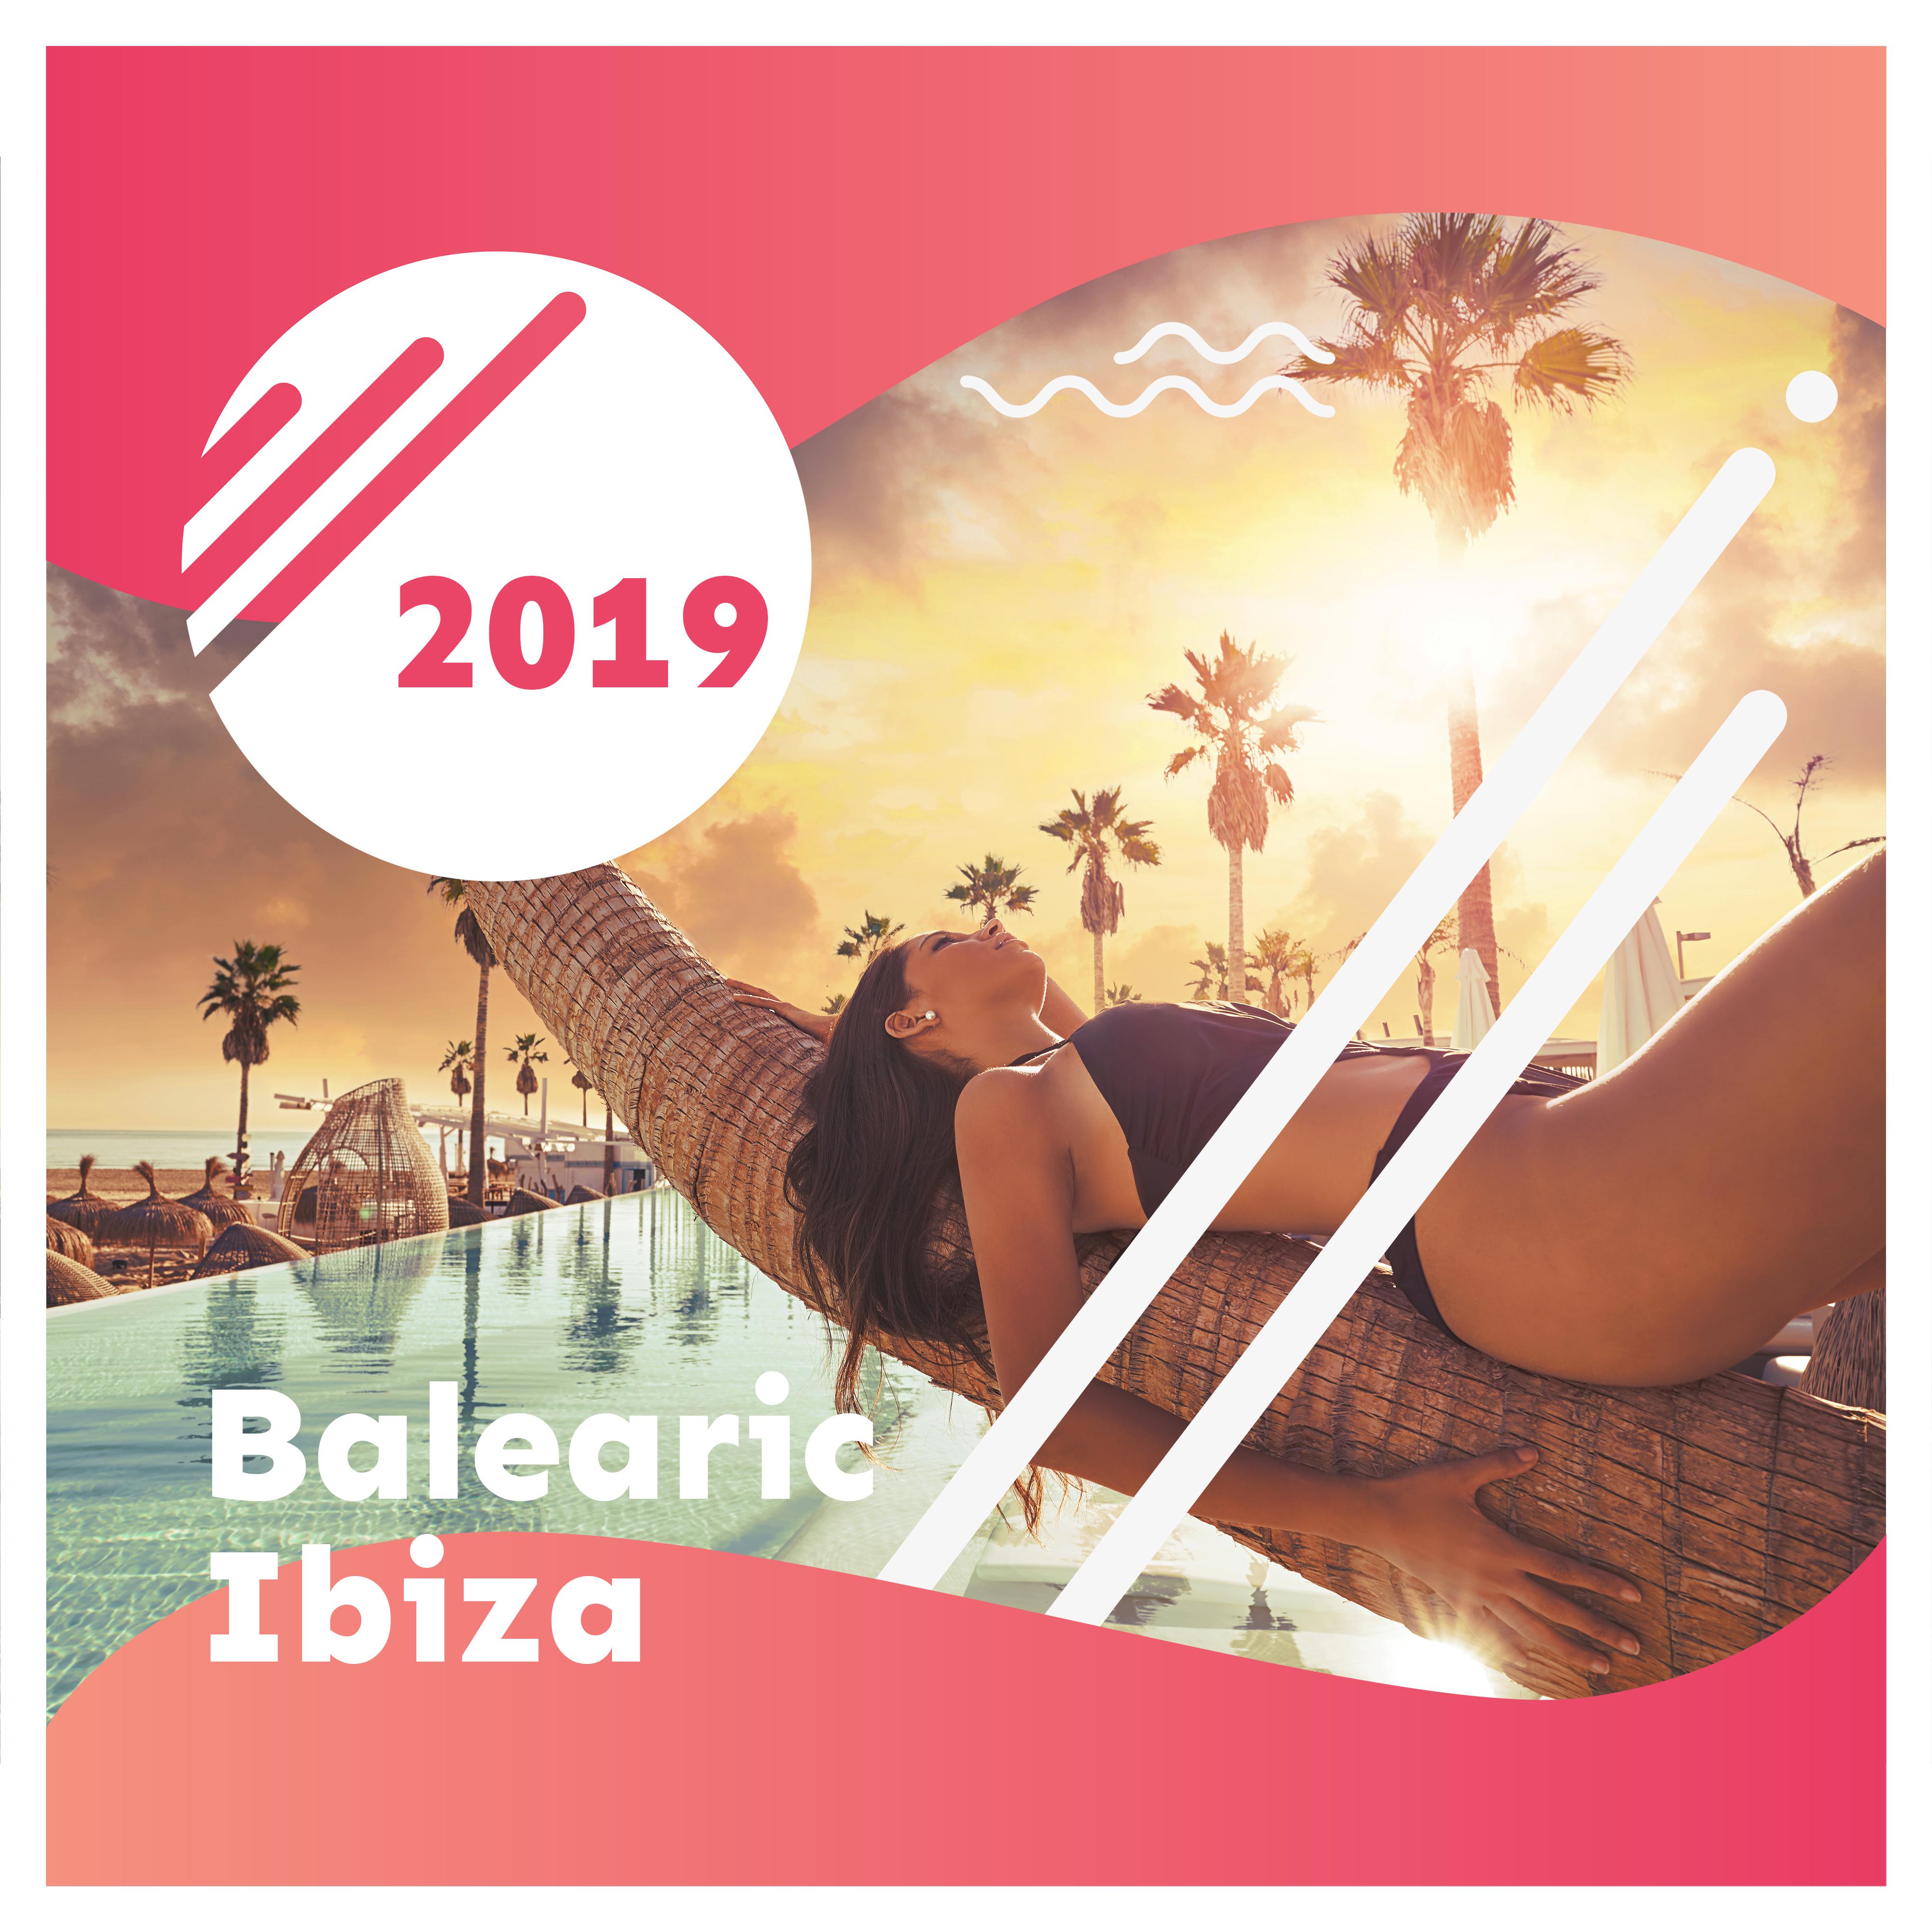 Balearic Ibiza 2019: Chillout Relaxation Tunes, Peaceful Vibrations, Summer Relaxation, Beach Chillout, Music Zone